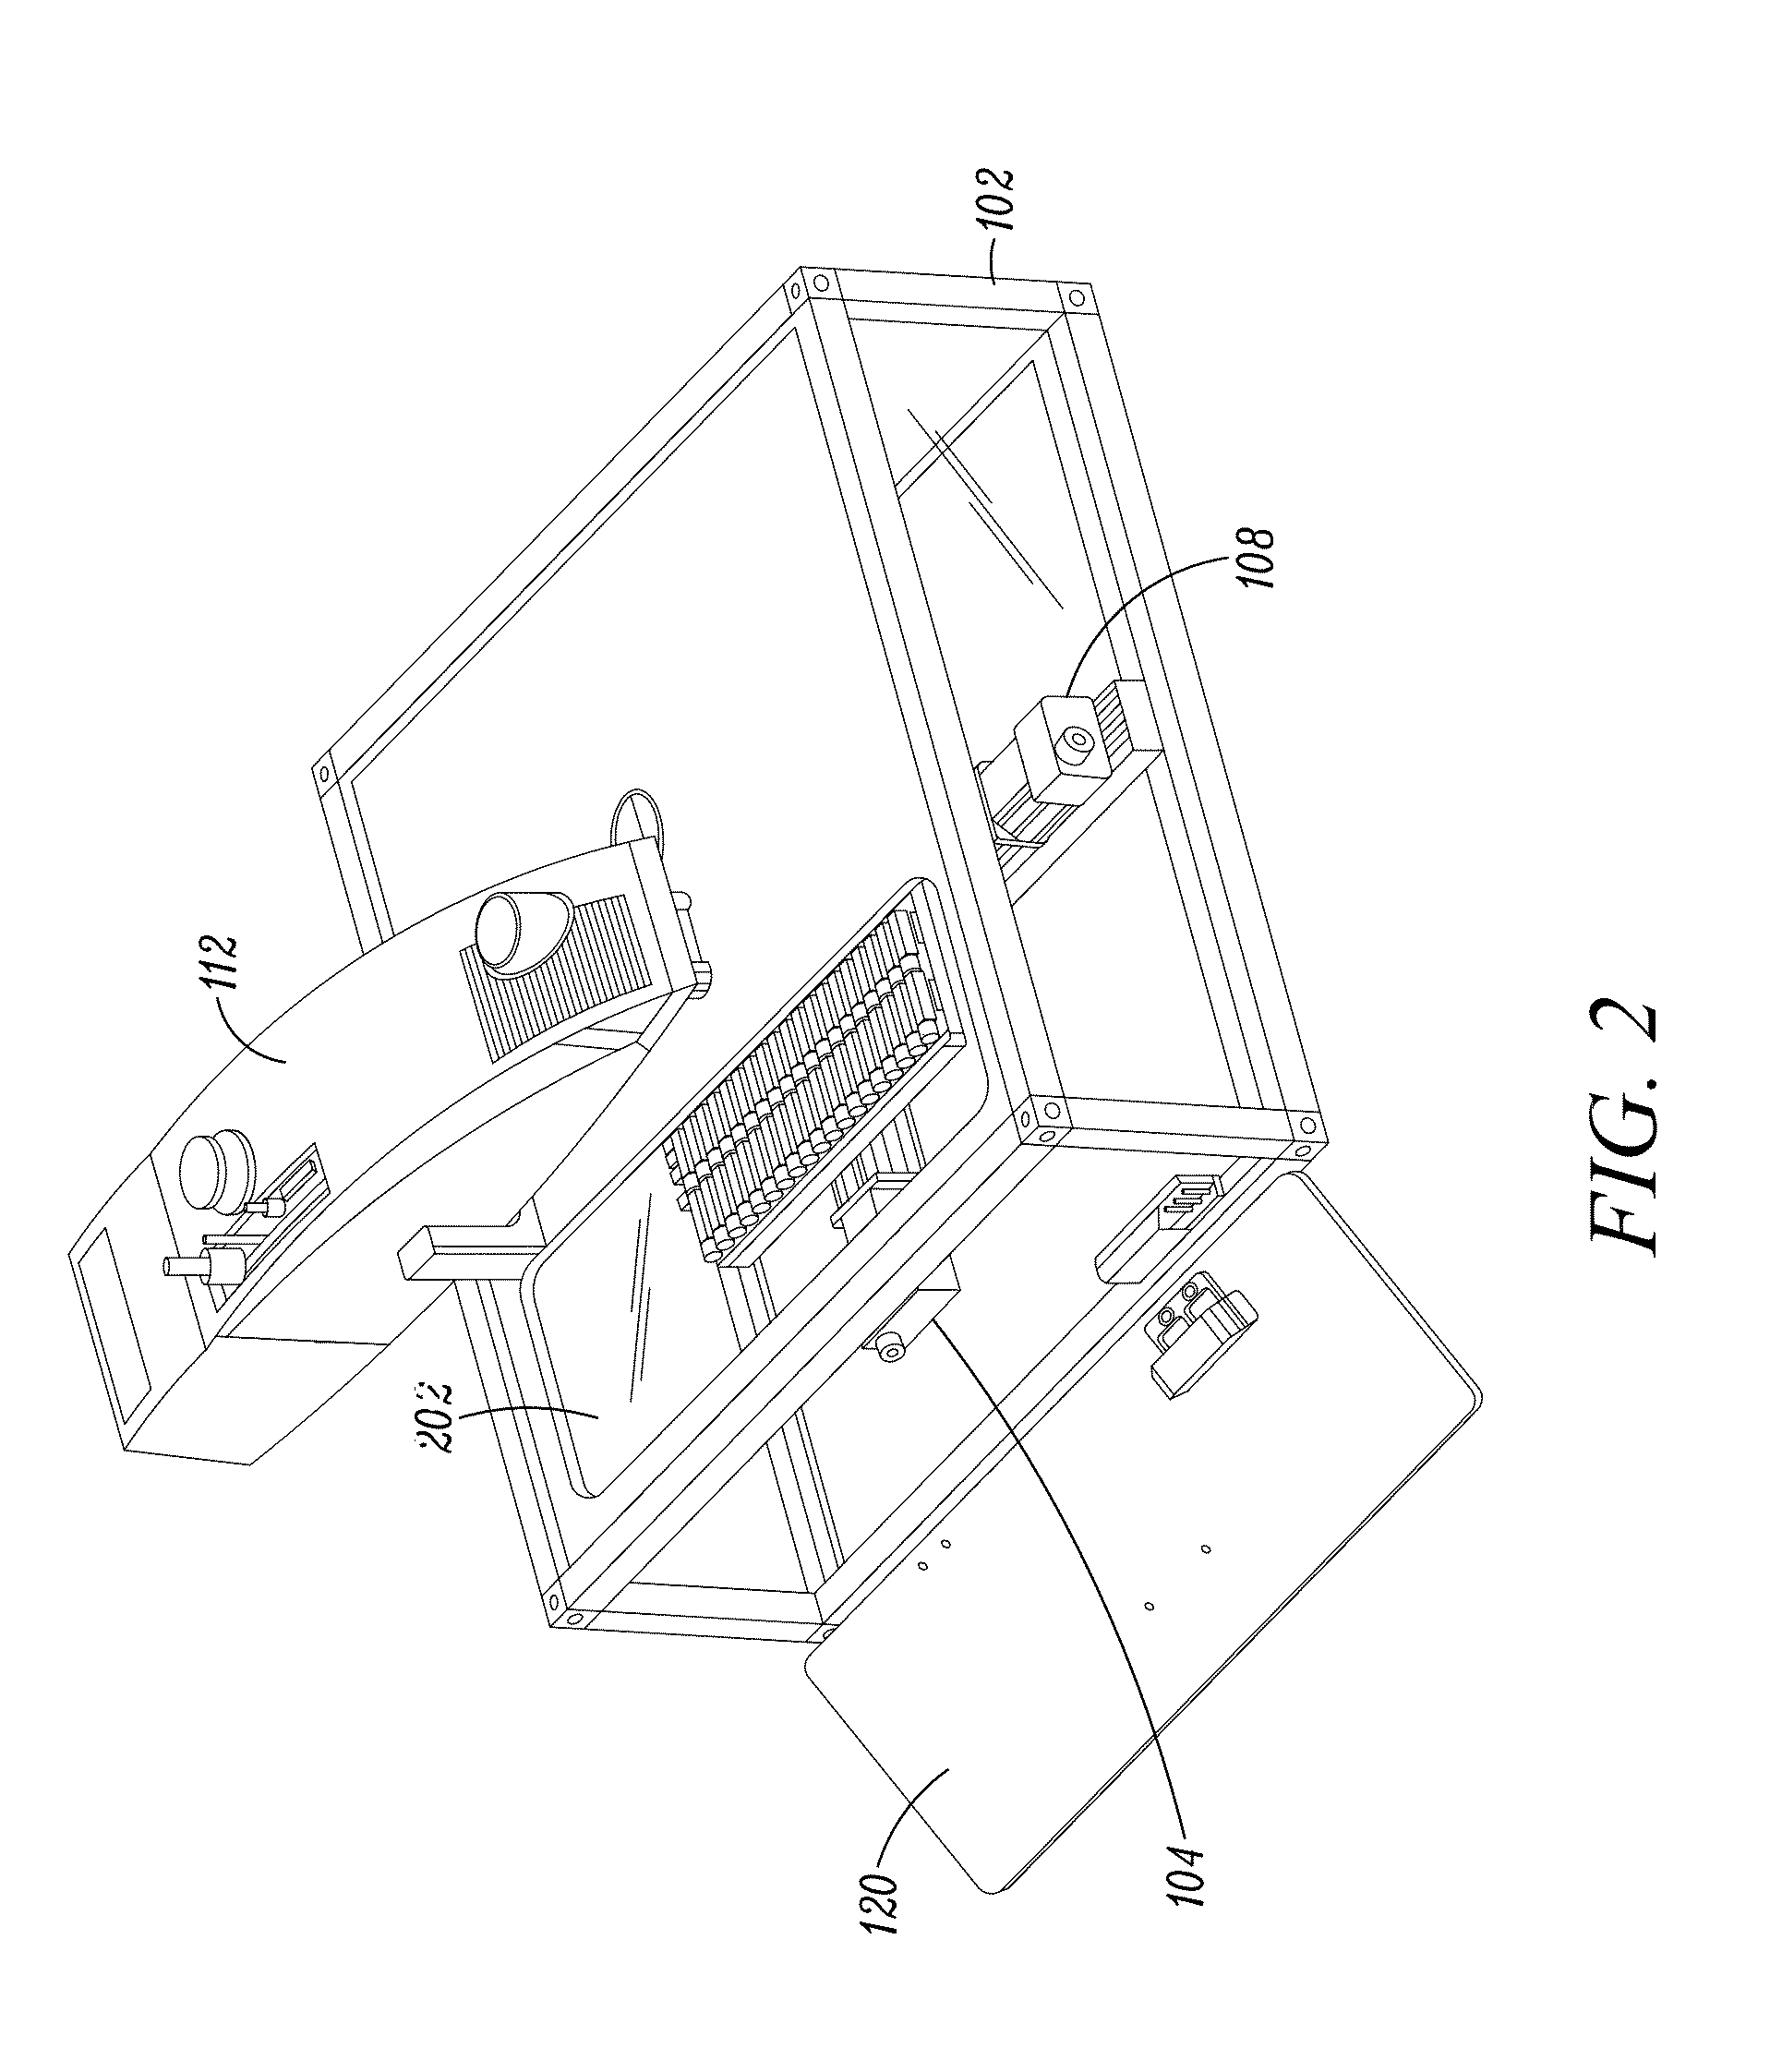 System and method of marking articles coated with a laser-sensitive material